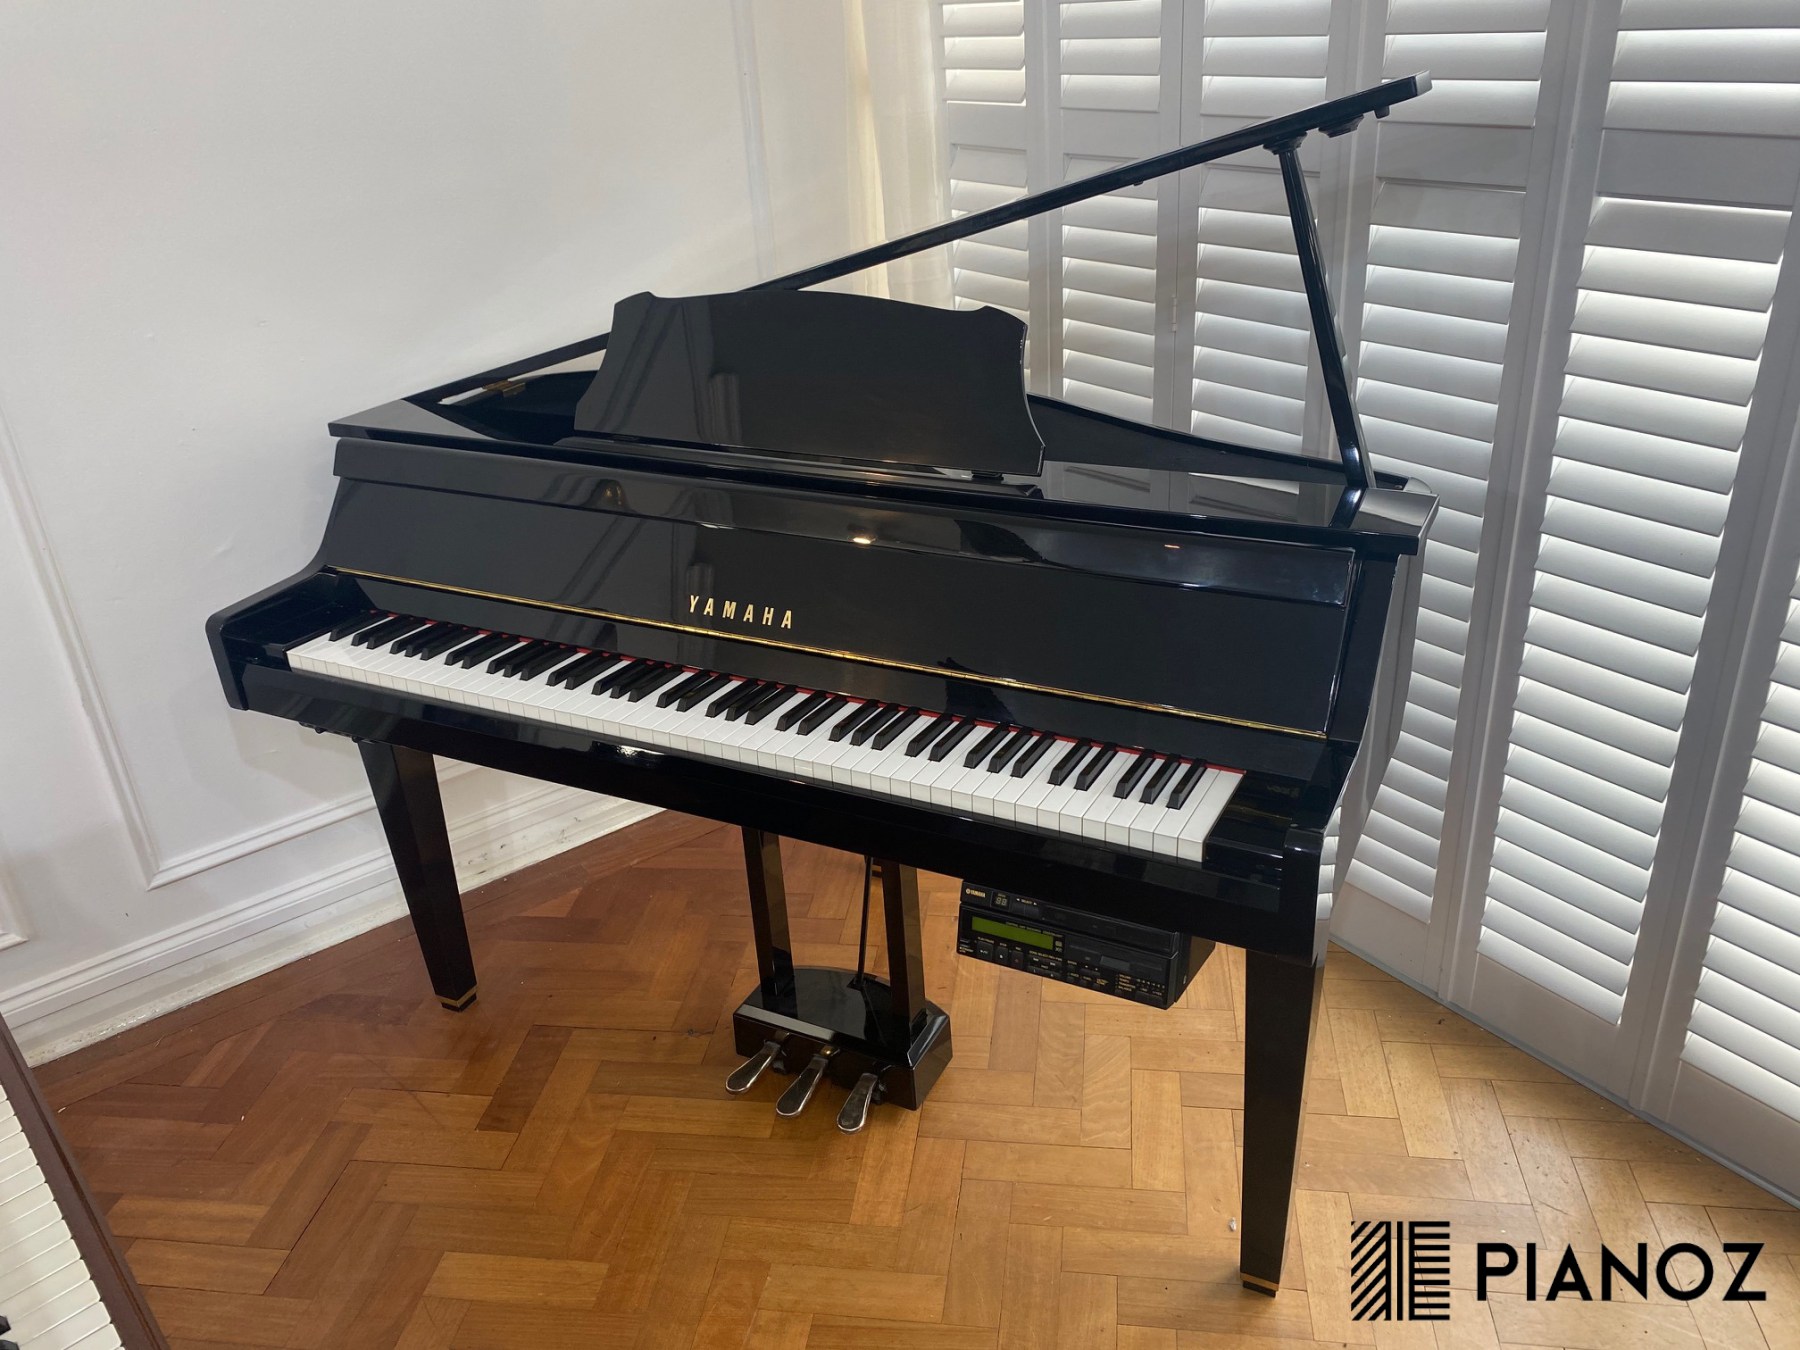 Yamaha Self Playing Disklavier Digital Baby Grand Piano piano for sale in UK